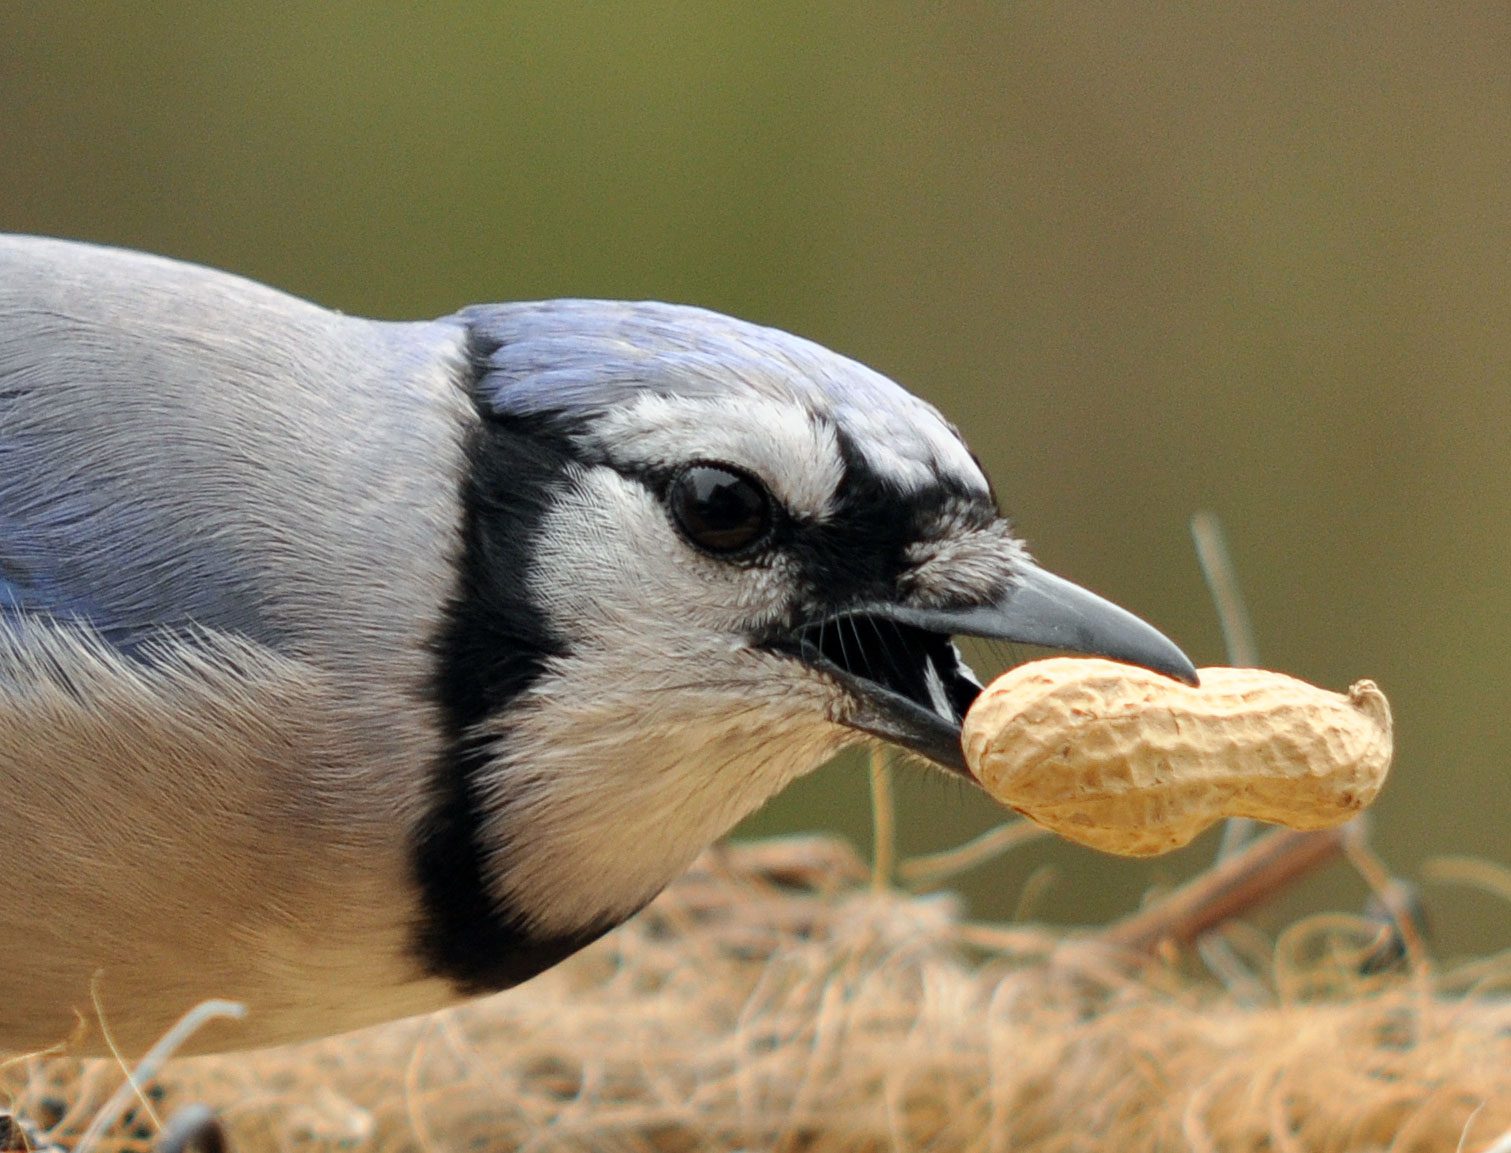 A Blue Jay has a special adaptation so it can grab a few big peanuts at one time. Photo by Deborah Bifulco via Birdshare.